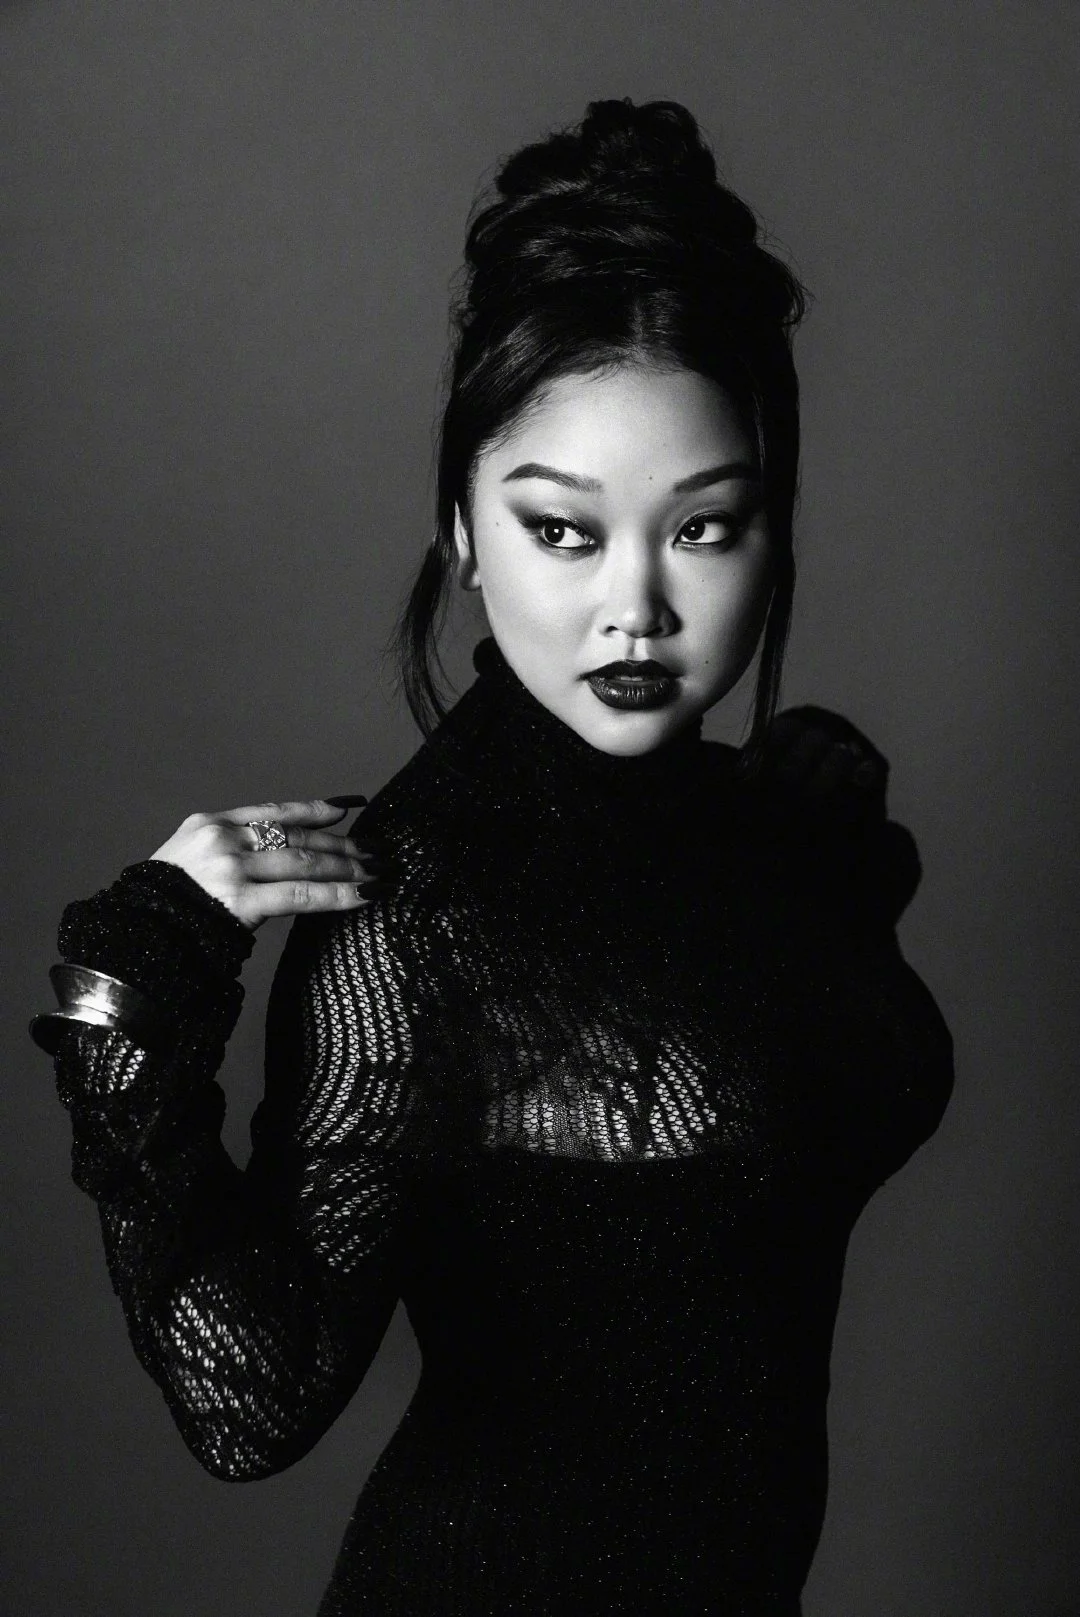 Lana Condor, "Flaunt" magazine "Phone a Friend" special issue photo ​​​